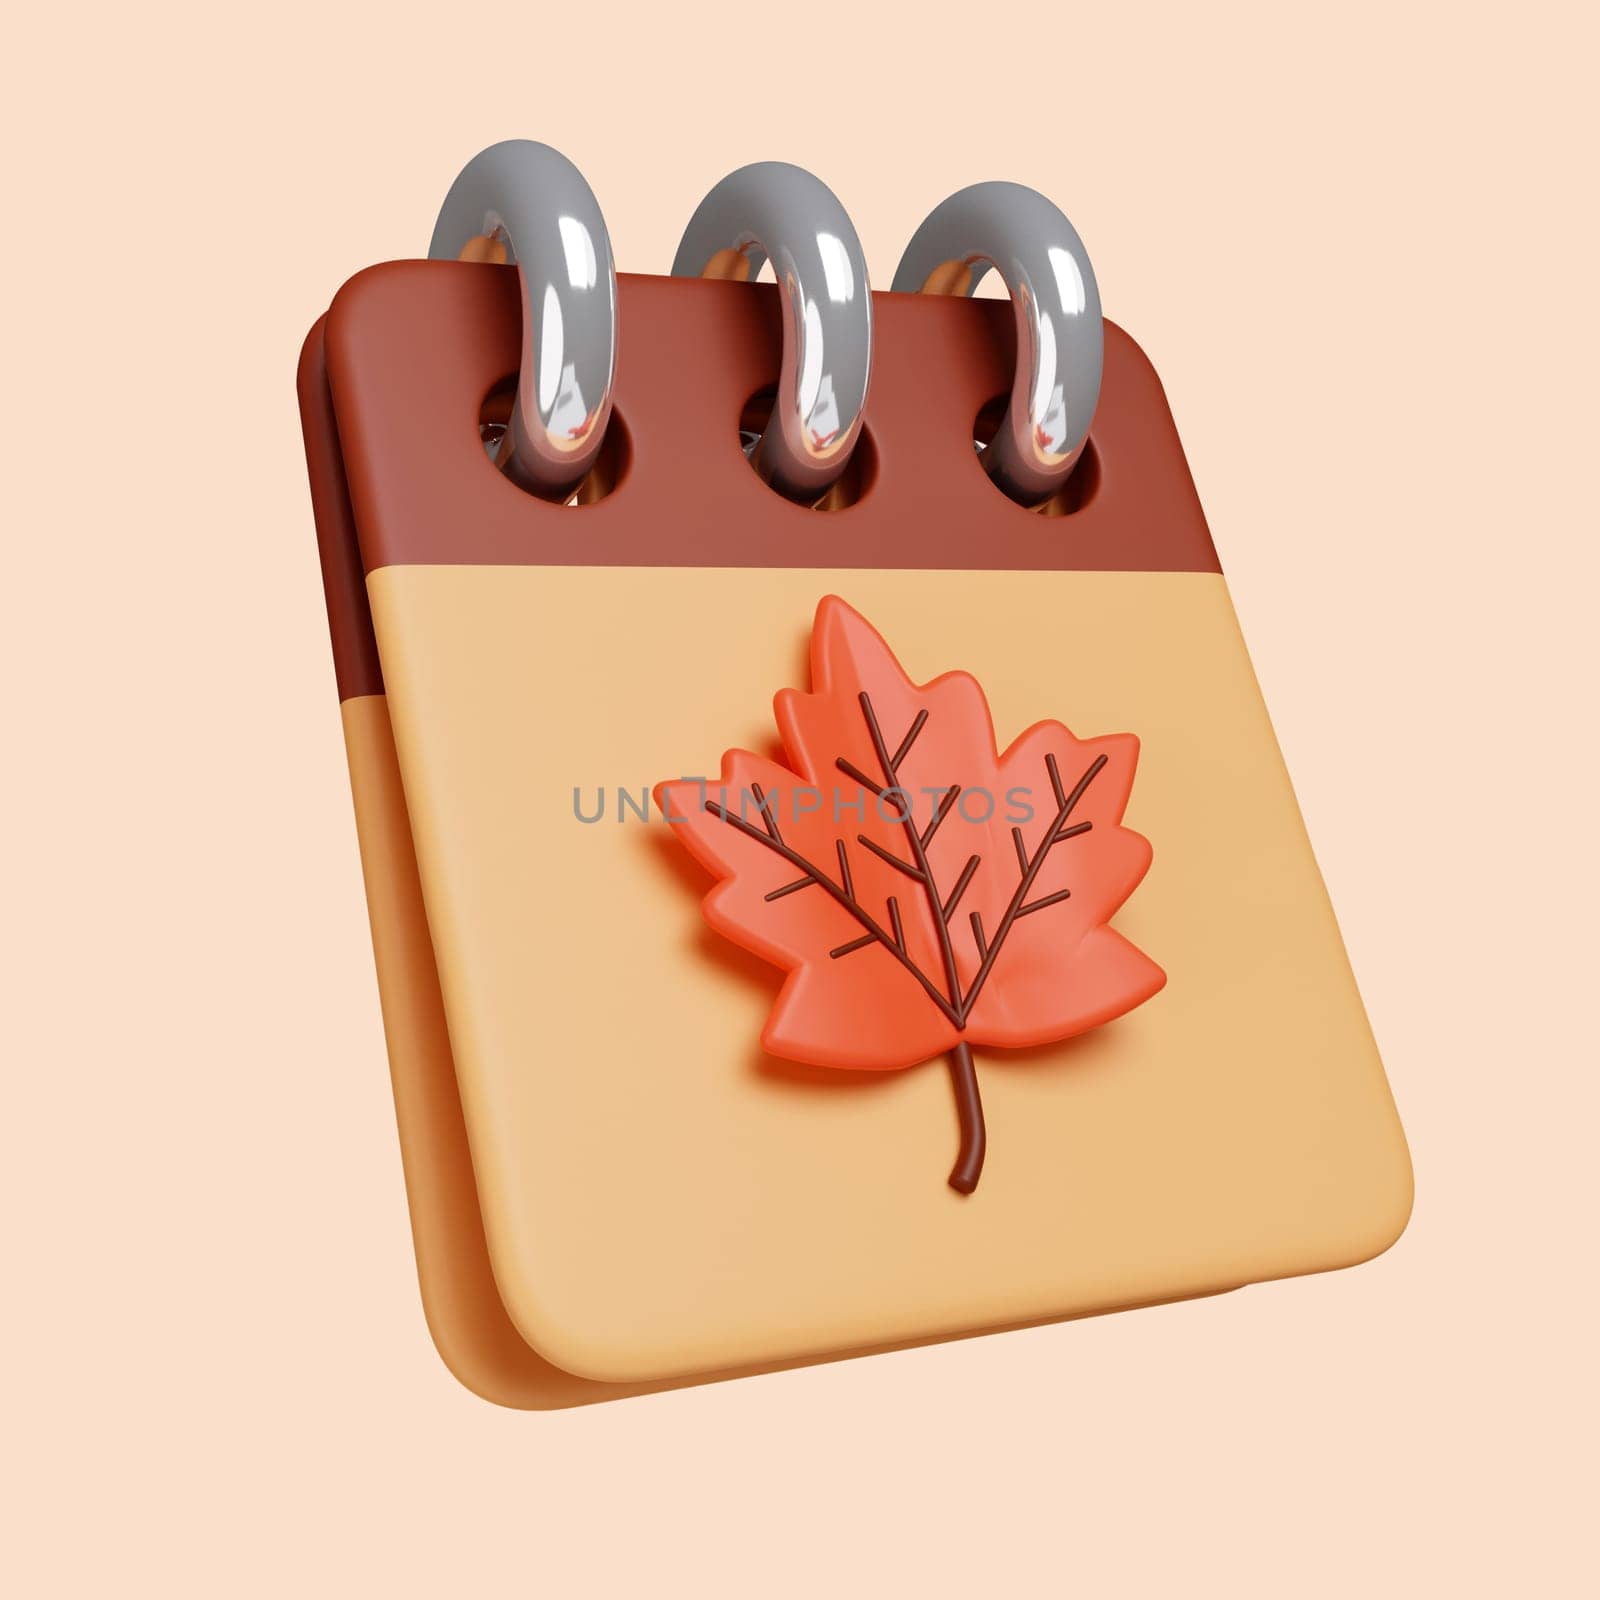 3d Autumn calendrer . Golden fall. Season decoration. icon isolated on gray background. 3d rendering illustration. Clipping path. by meepiangraphic